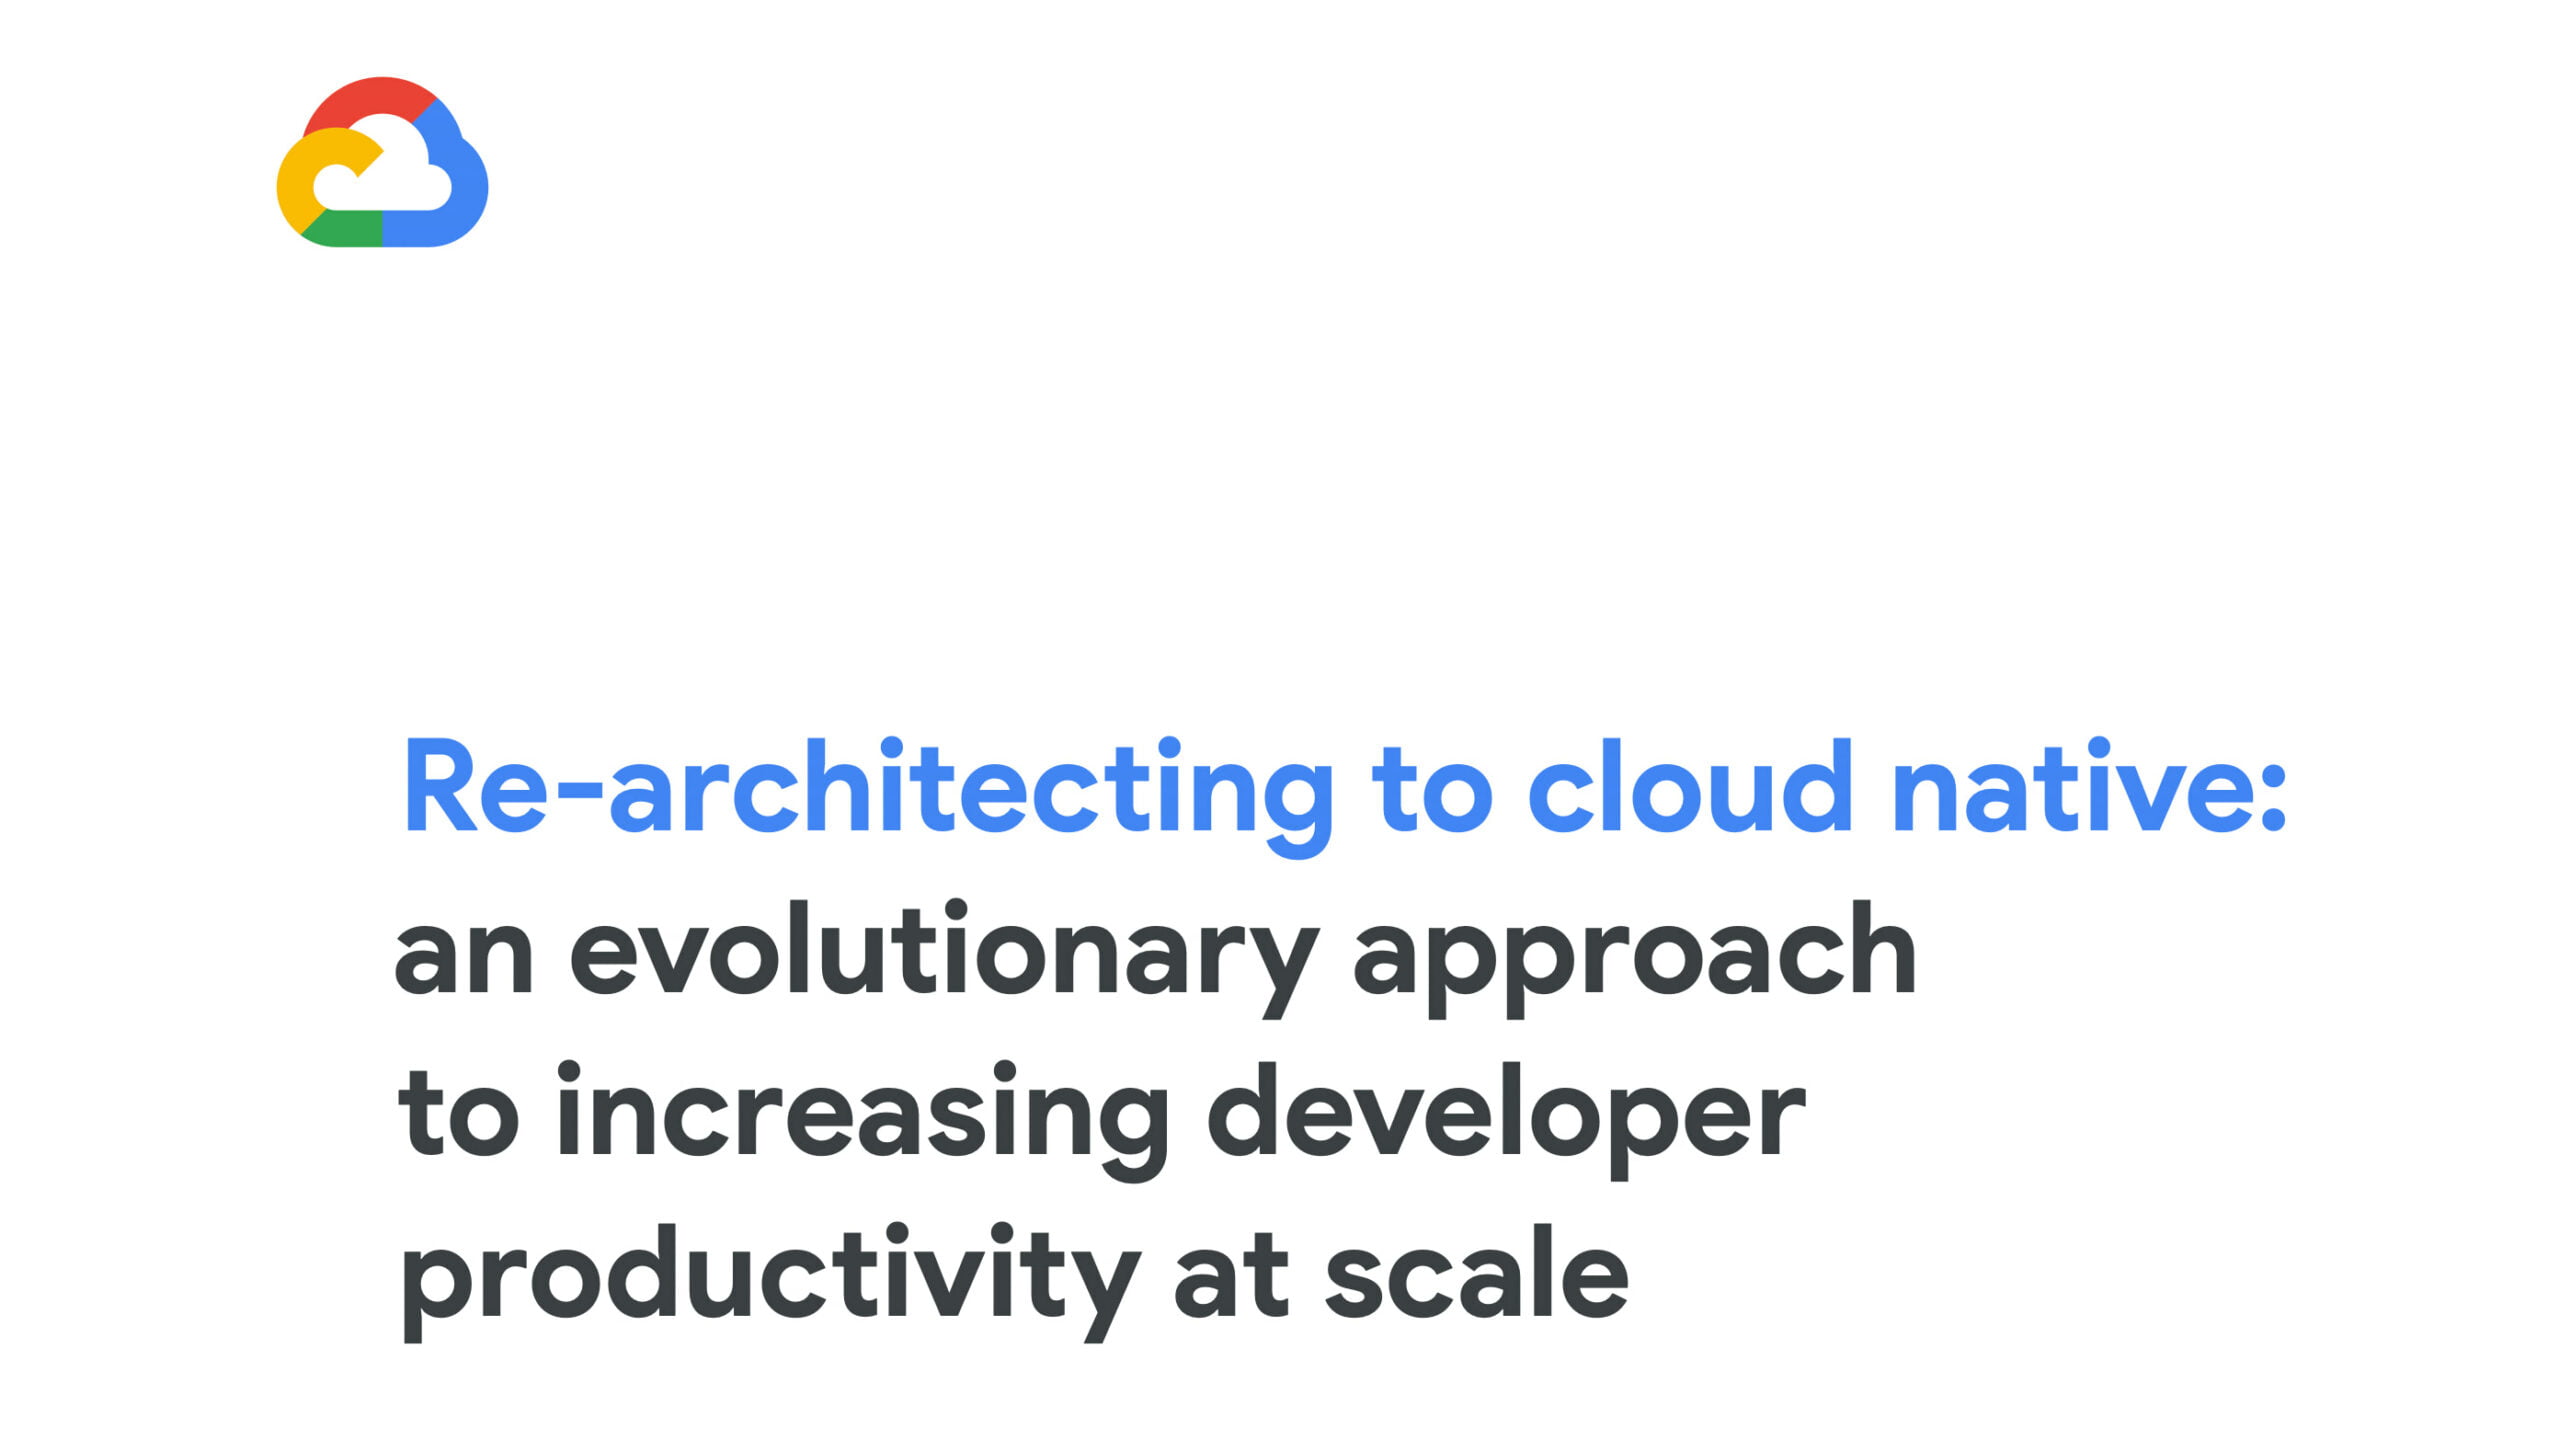 10. Re-architecting to cloud native